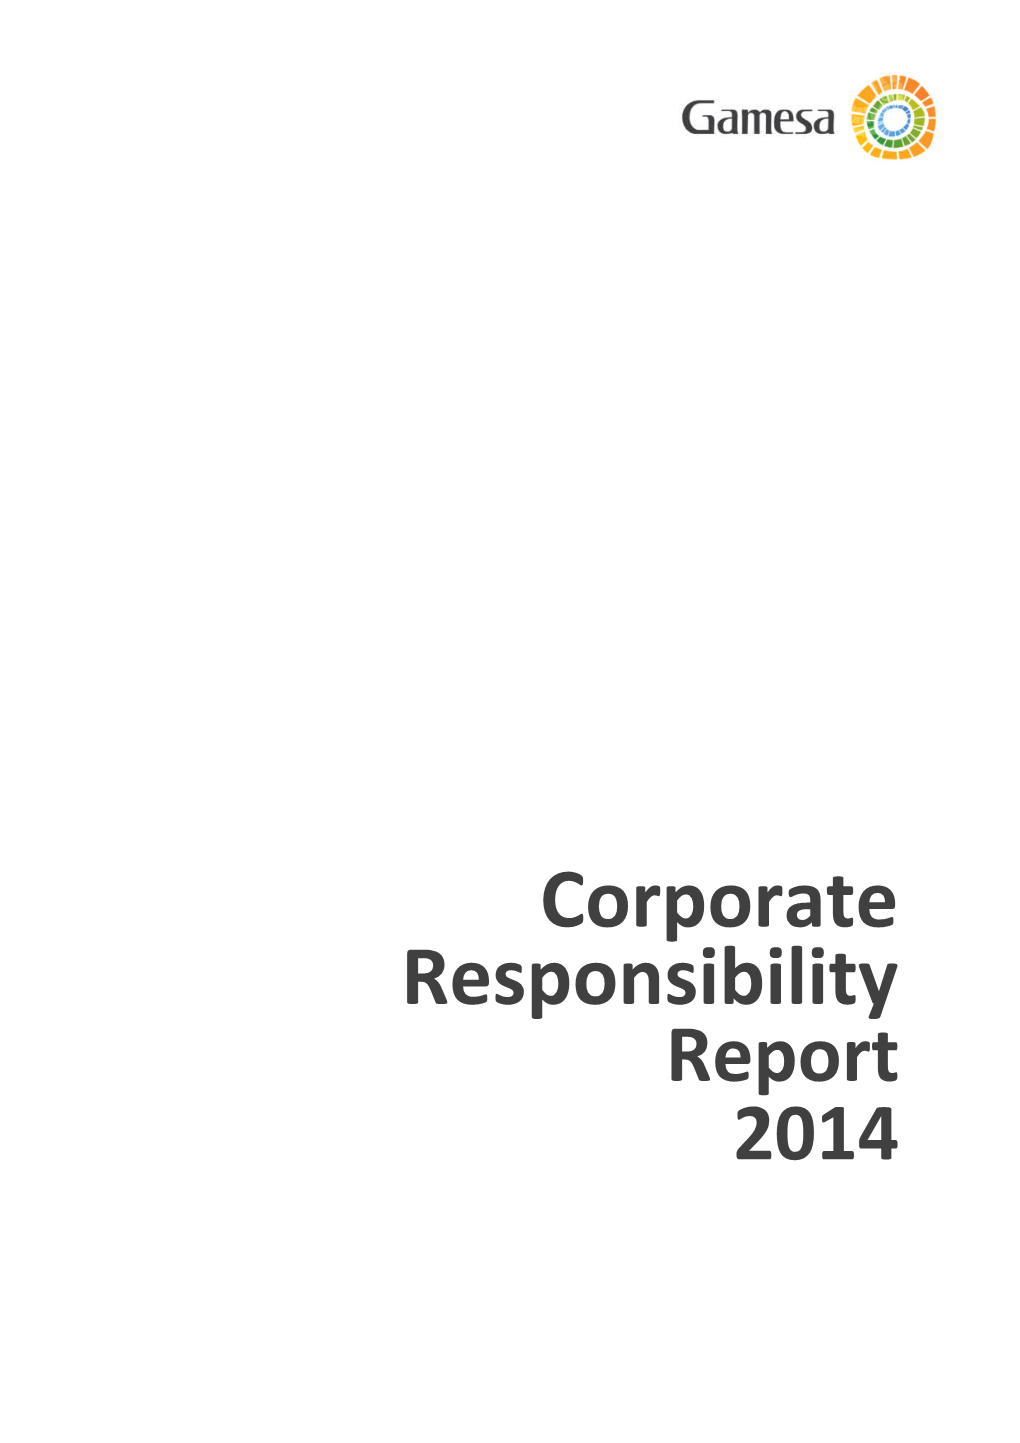 Corporate Responsibility Report 2014 STRUCTURE of the DOCUMENT